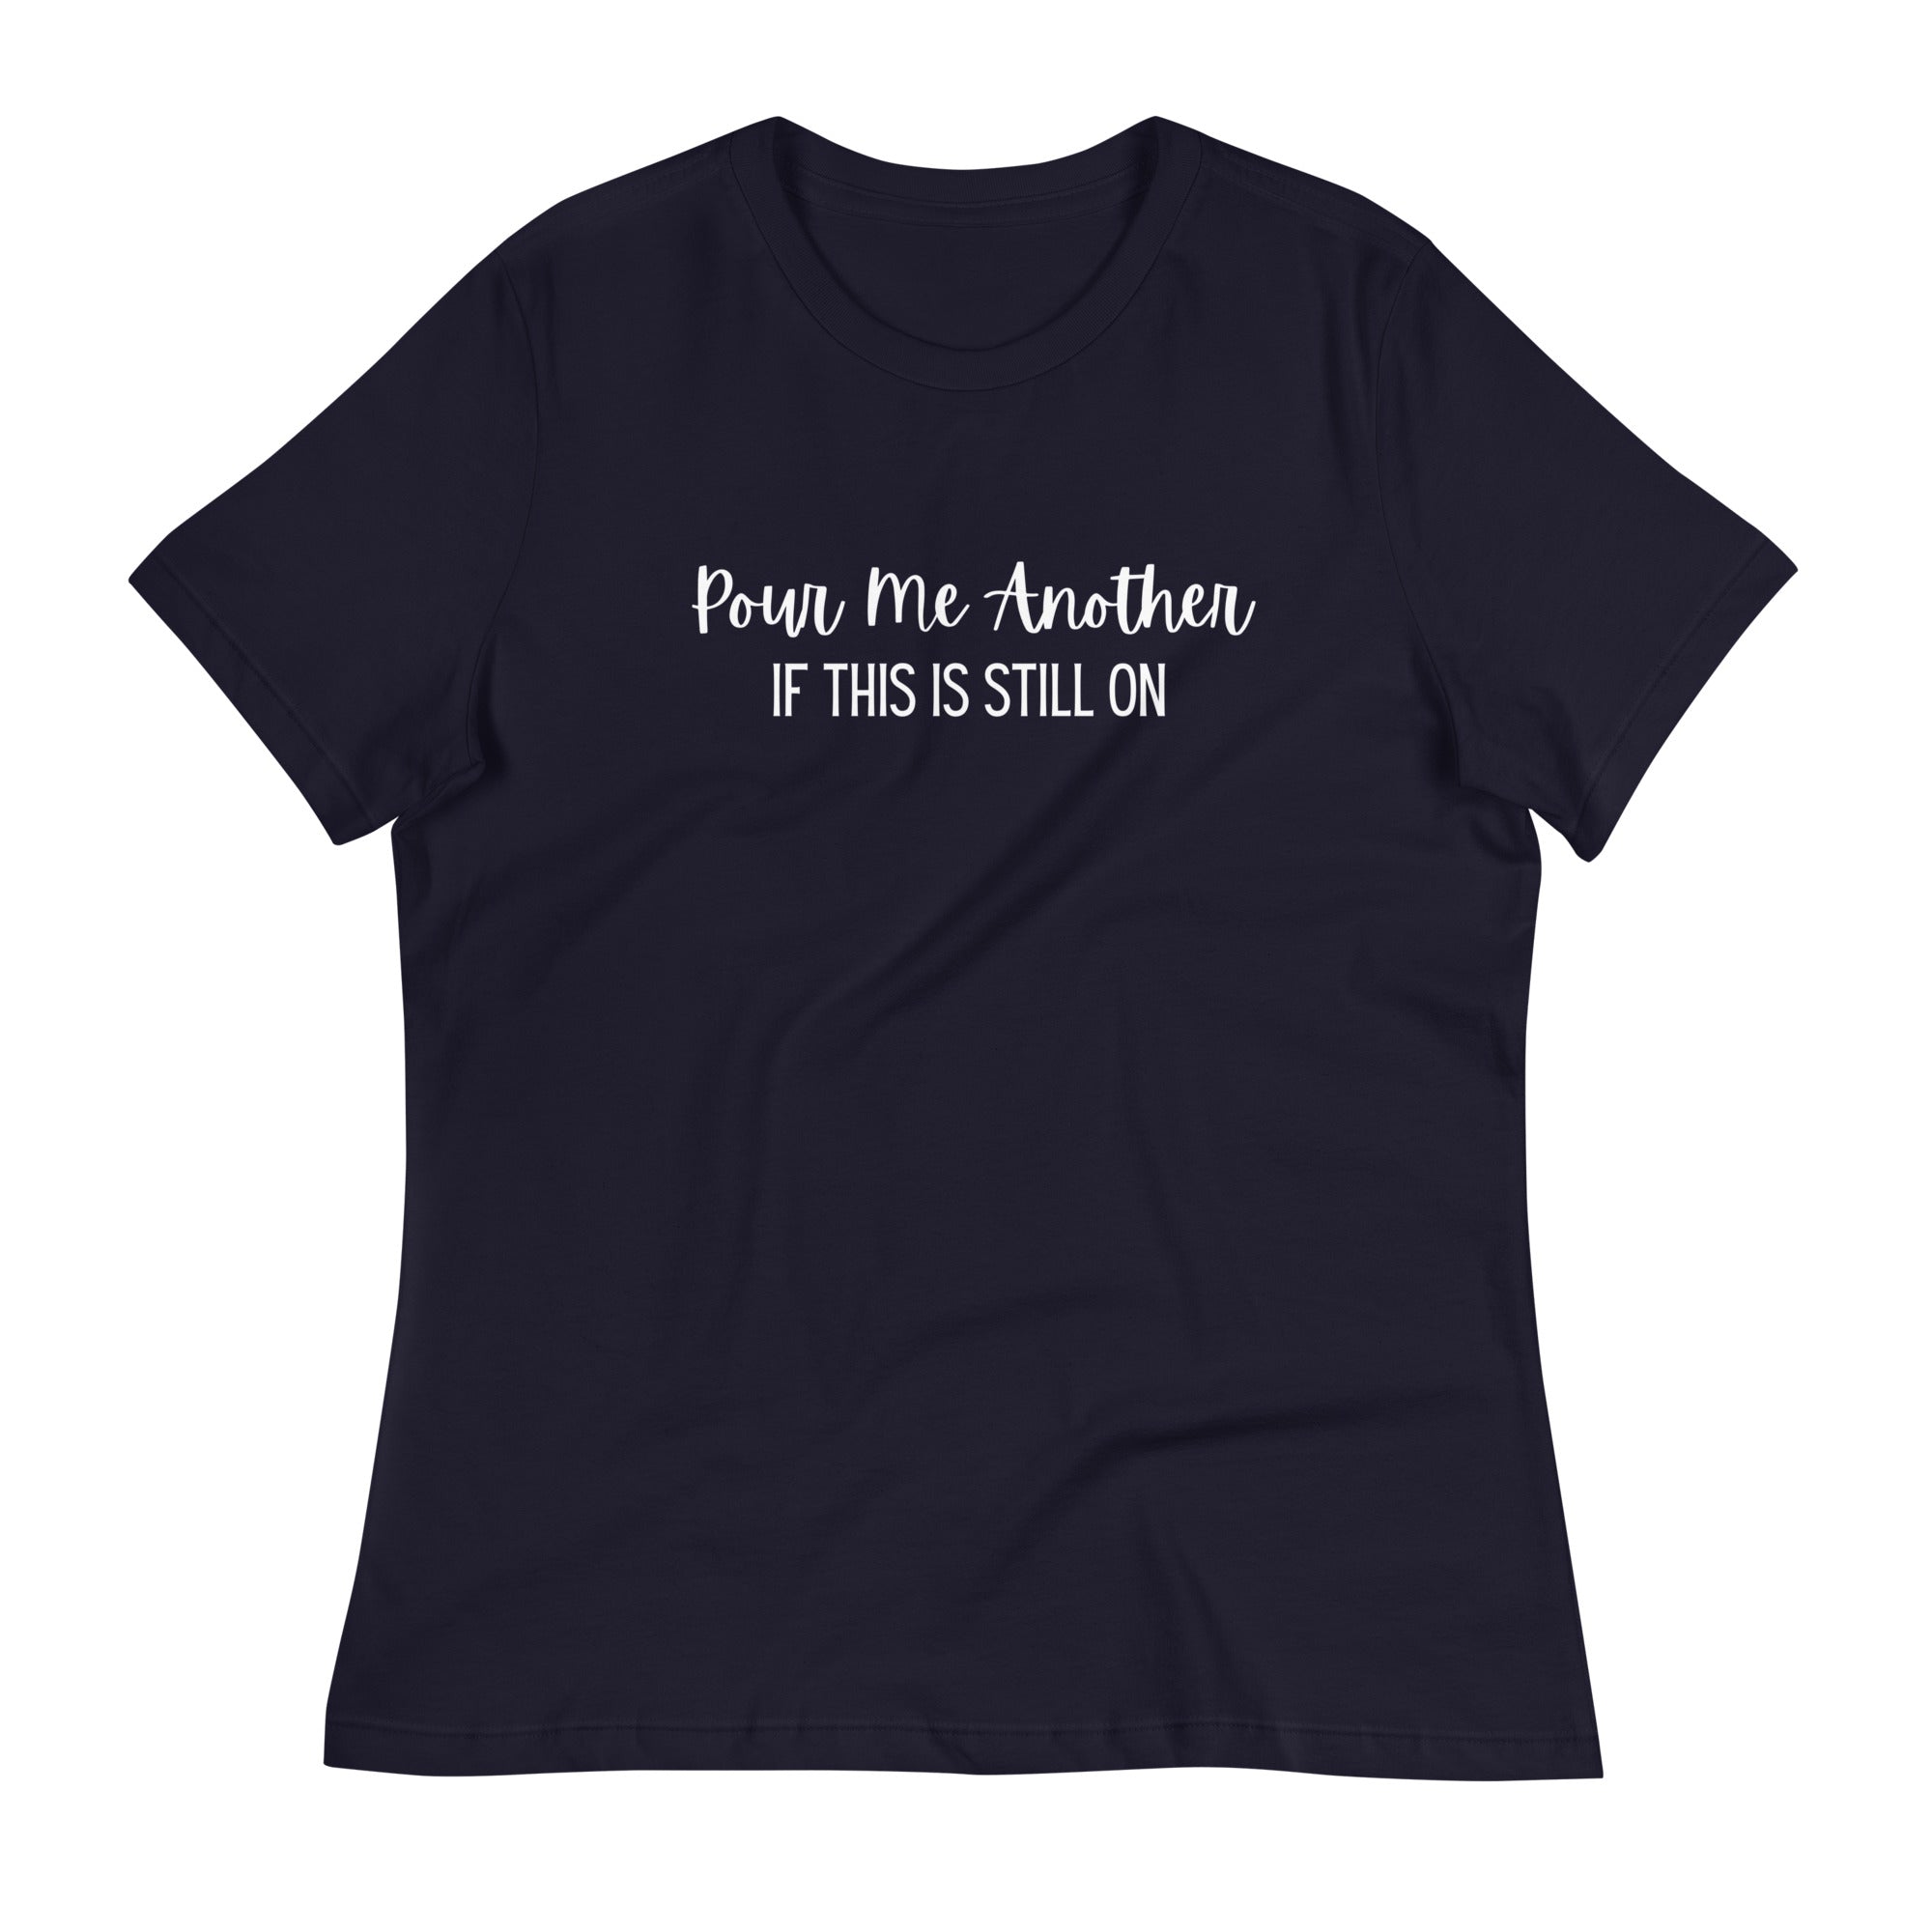 Pour Another T-Shirt